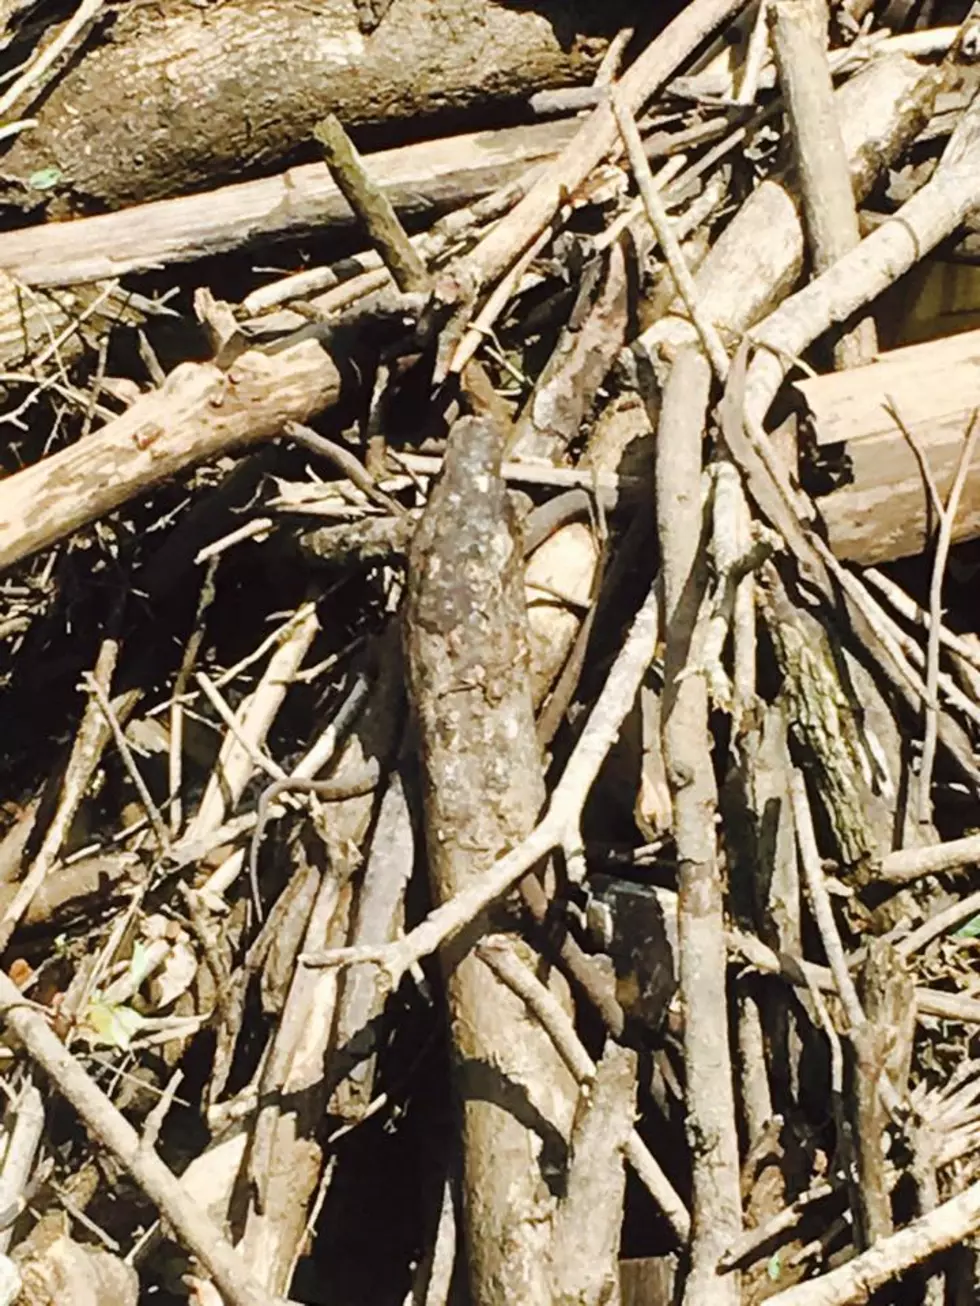 Can You Find The Moccasin Snake In This Pile Of Branches?